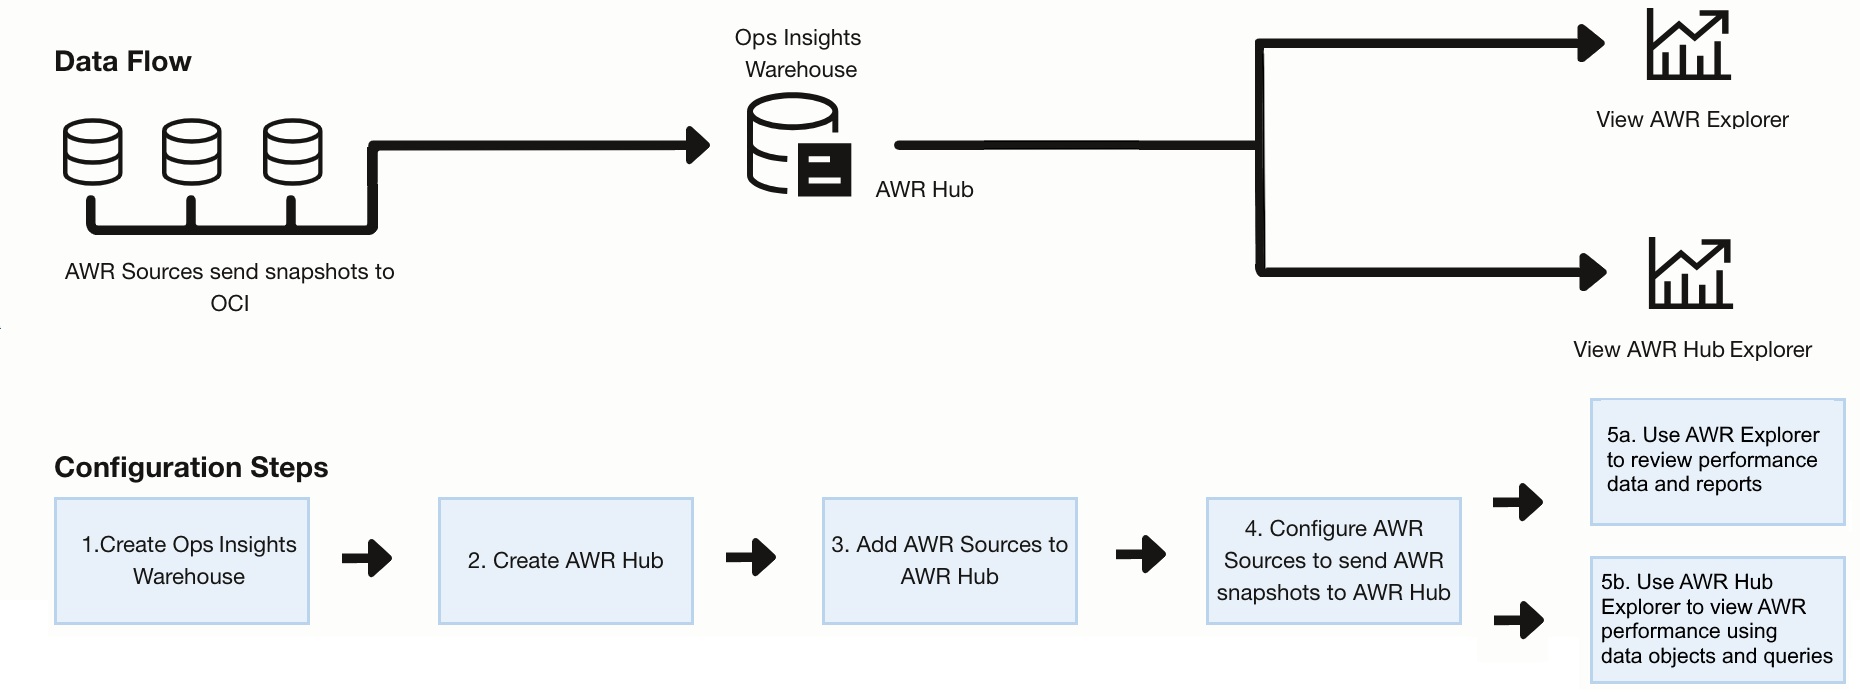 Steps to configure the AWR Hub and create the Warehouse